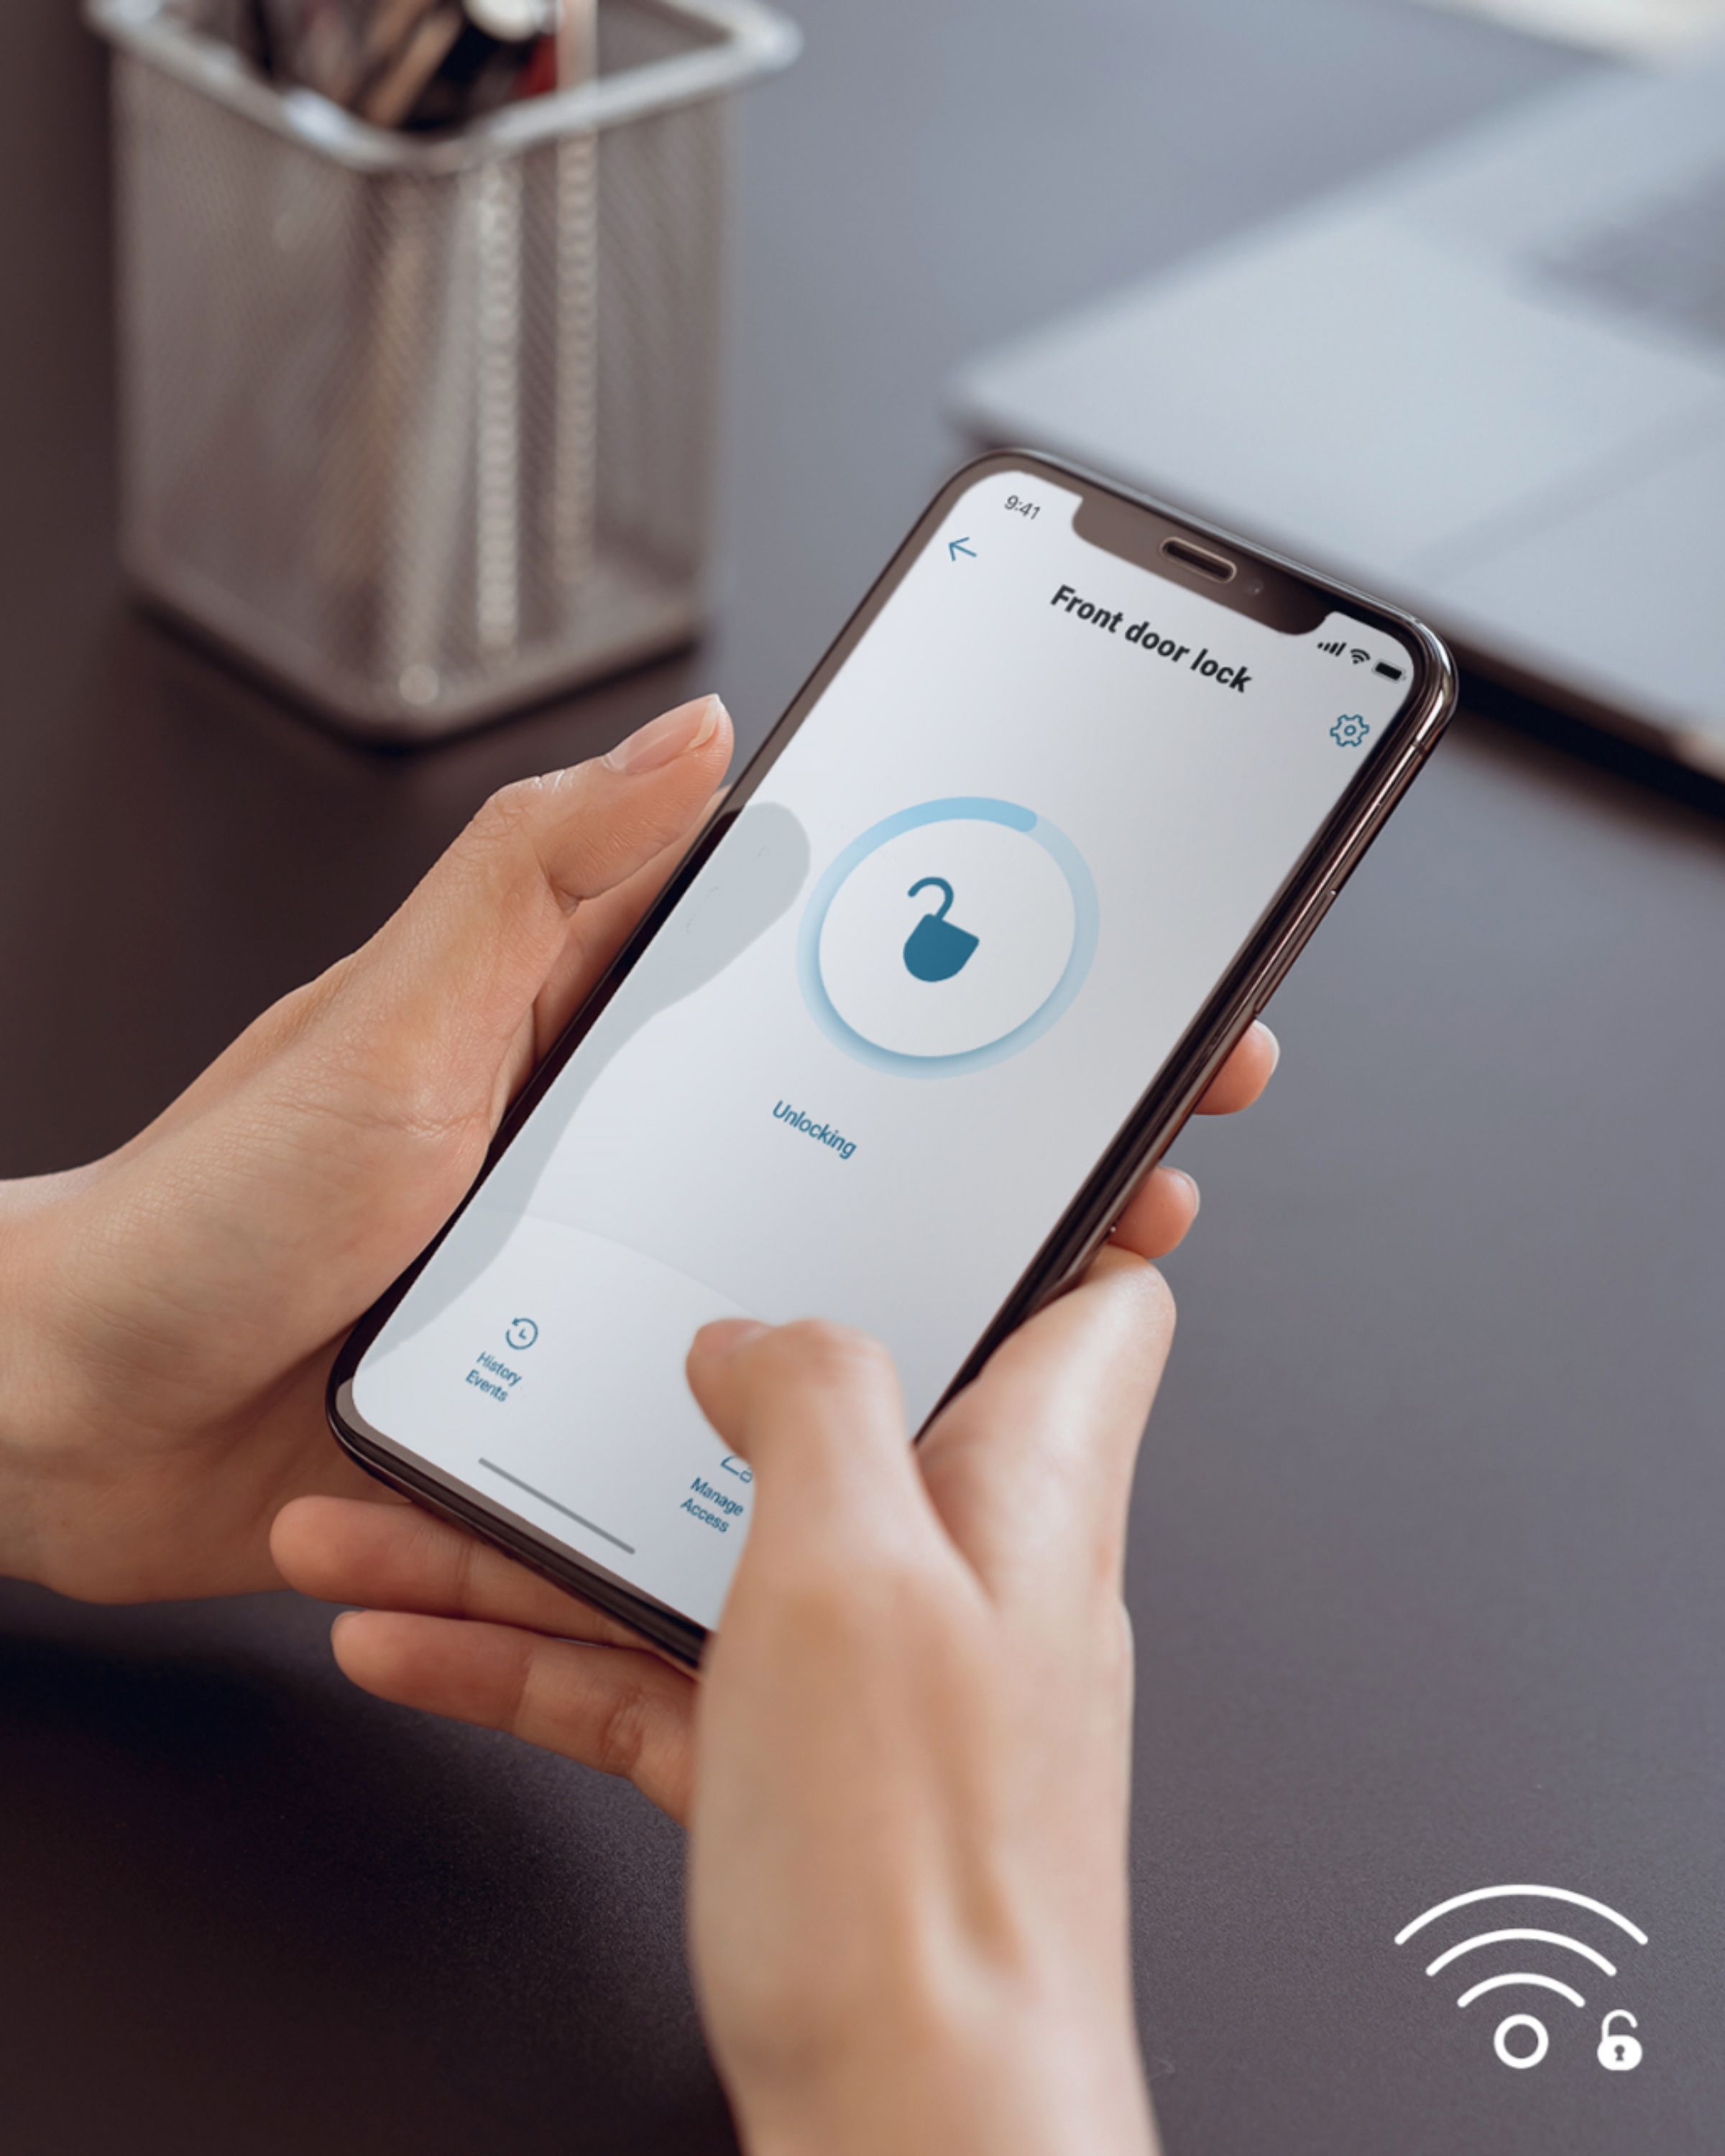 Left View: eufy Security - Smart Lock Wi-Fi Replacement Deadbolt with eufy App|Keypad|Biometric Access - Black